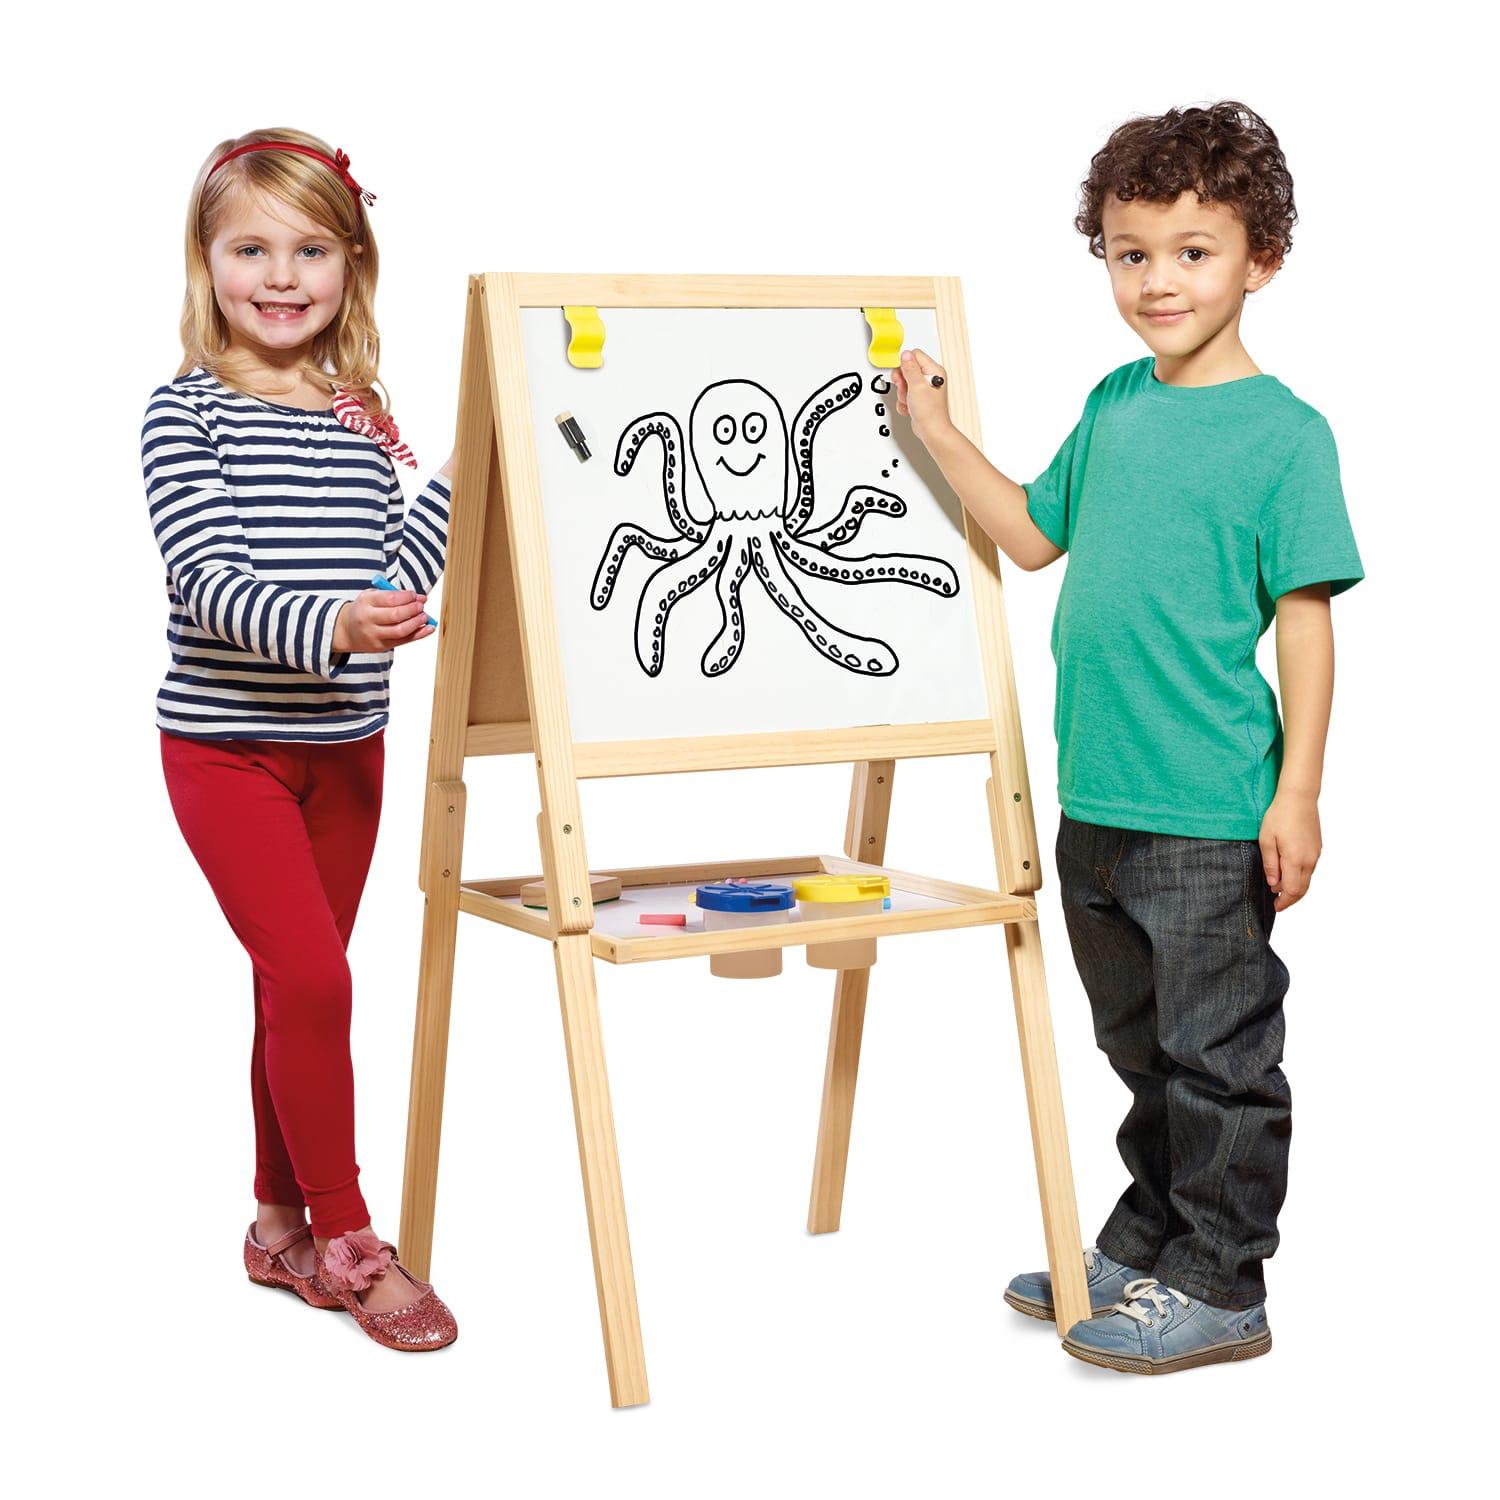 CASDON Wooden Easel Double-Sided Easel for Children Aged 3+ 2-in-1 Blackboard and Whiteboard for Your Little Artists! 